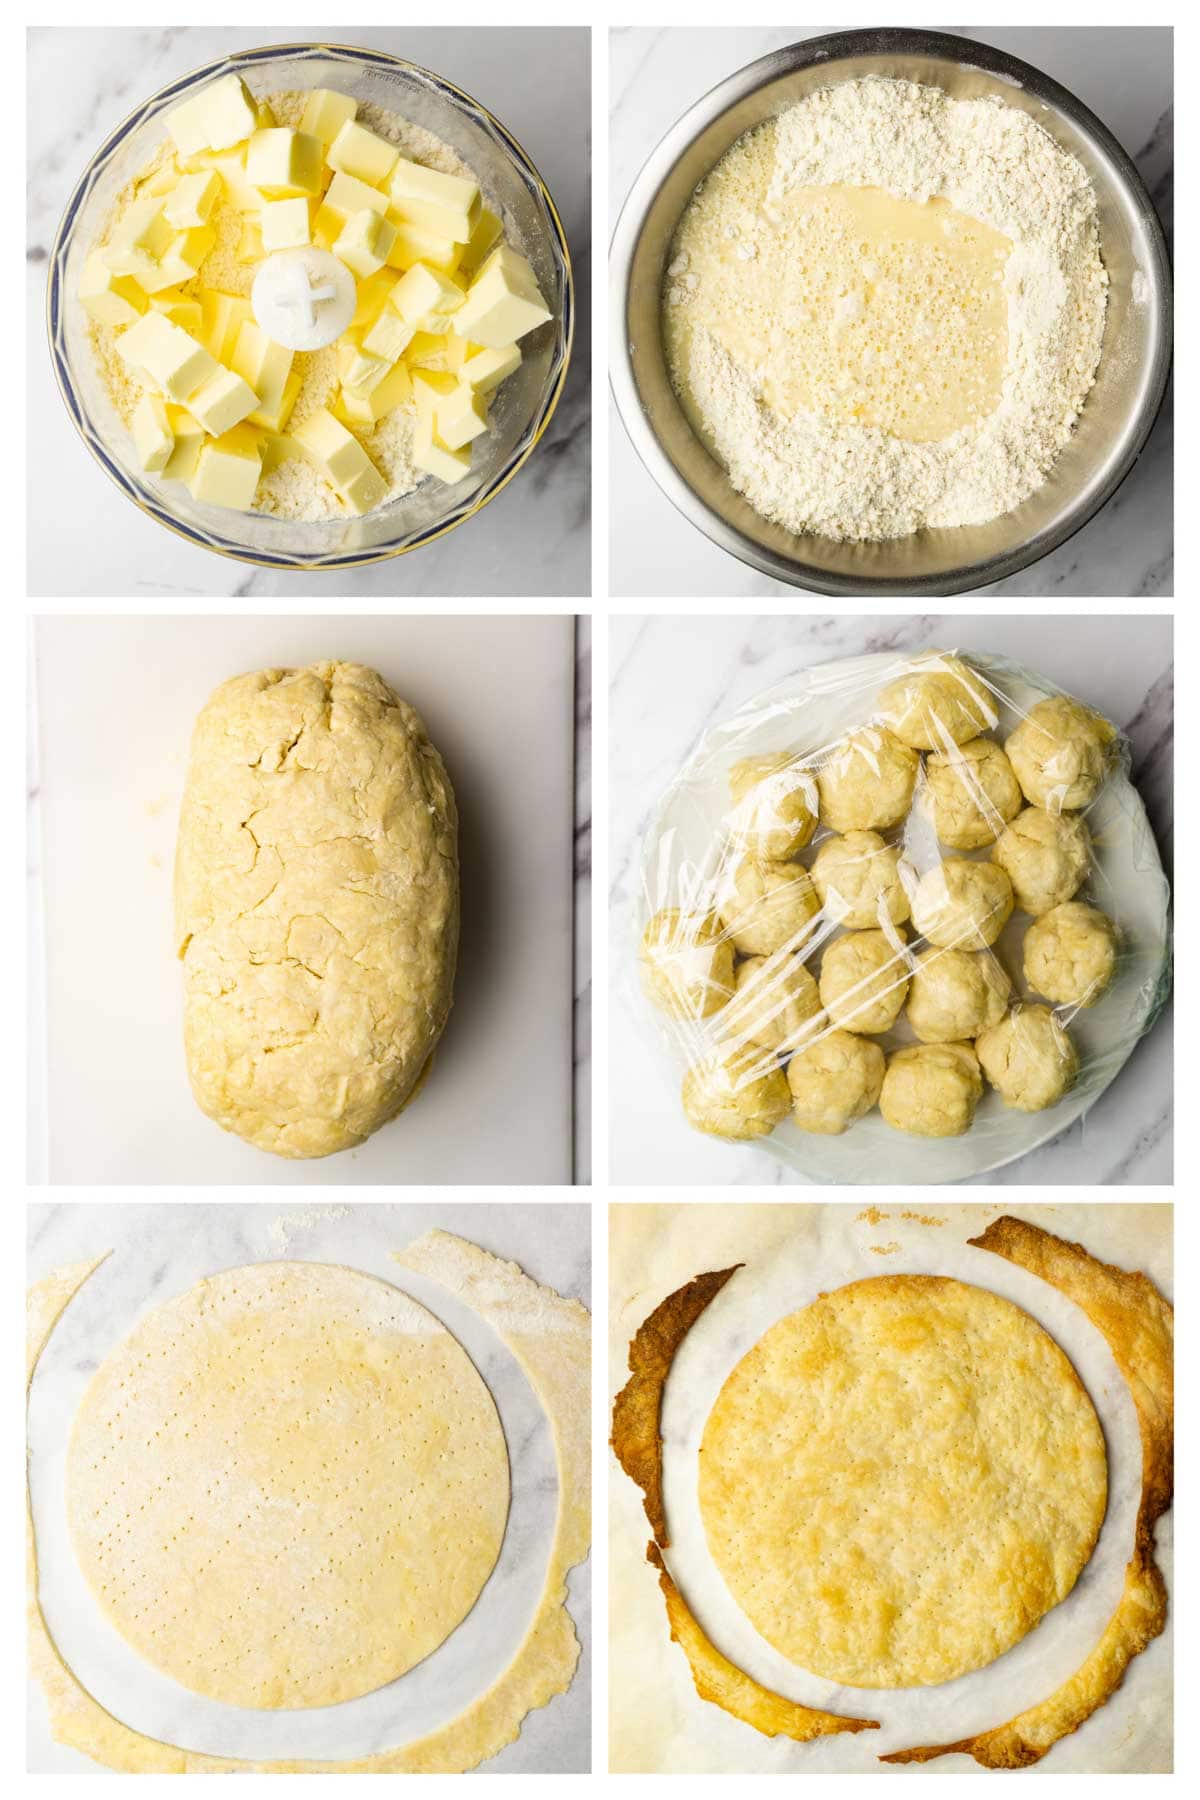 Collage image showing step by step instructions to make napoleon cake dough and bake the cake layers.